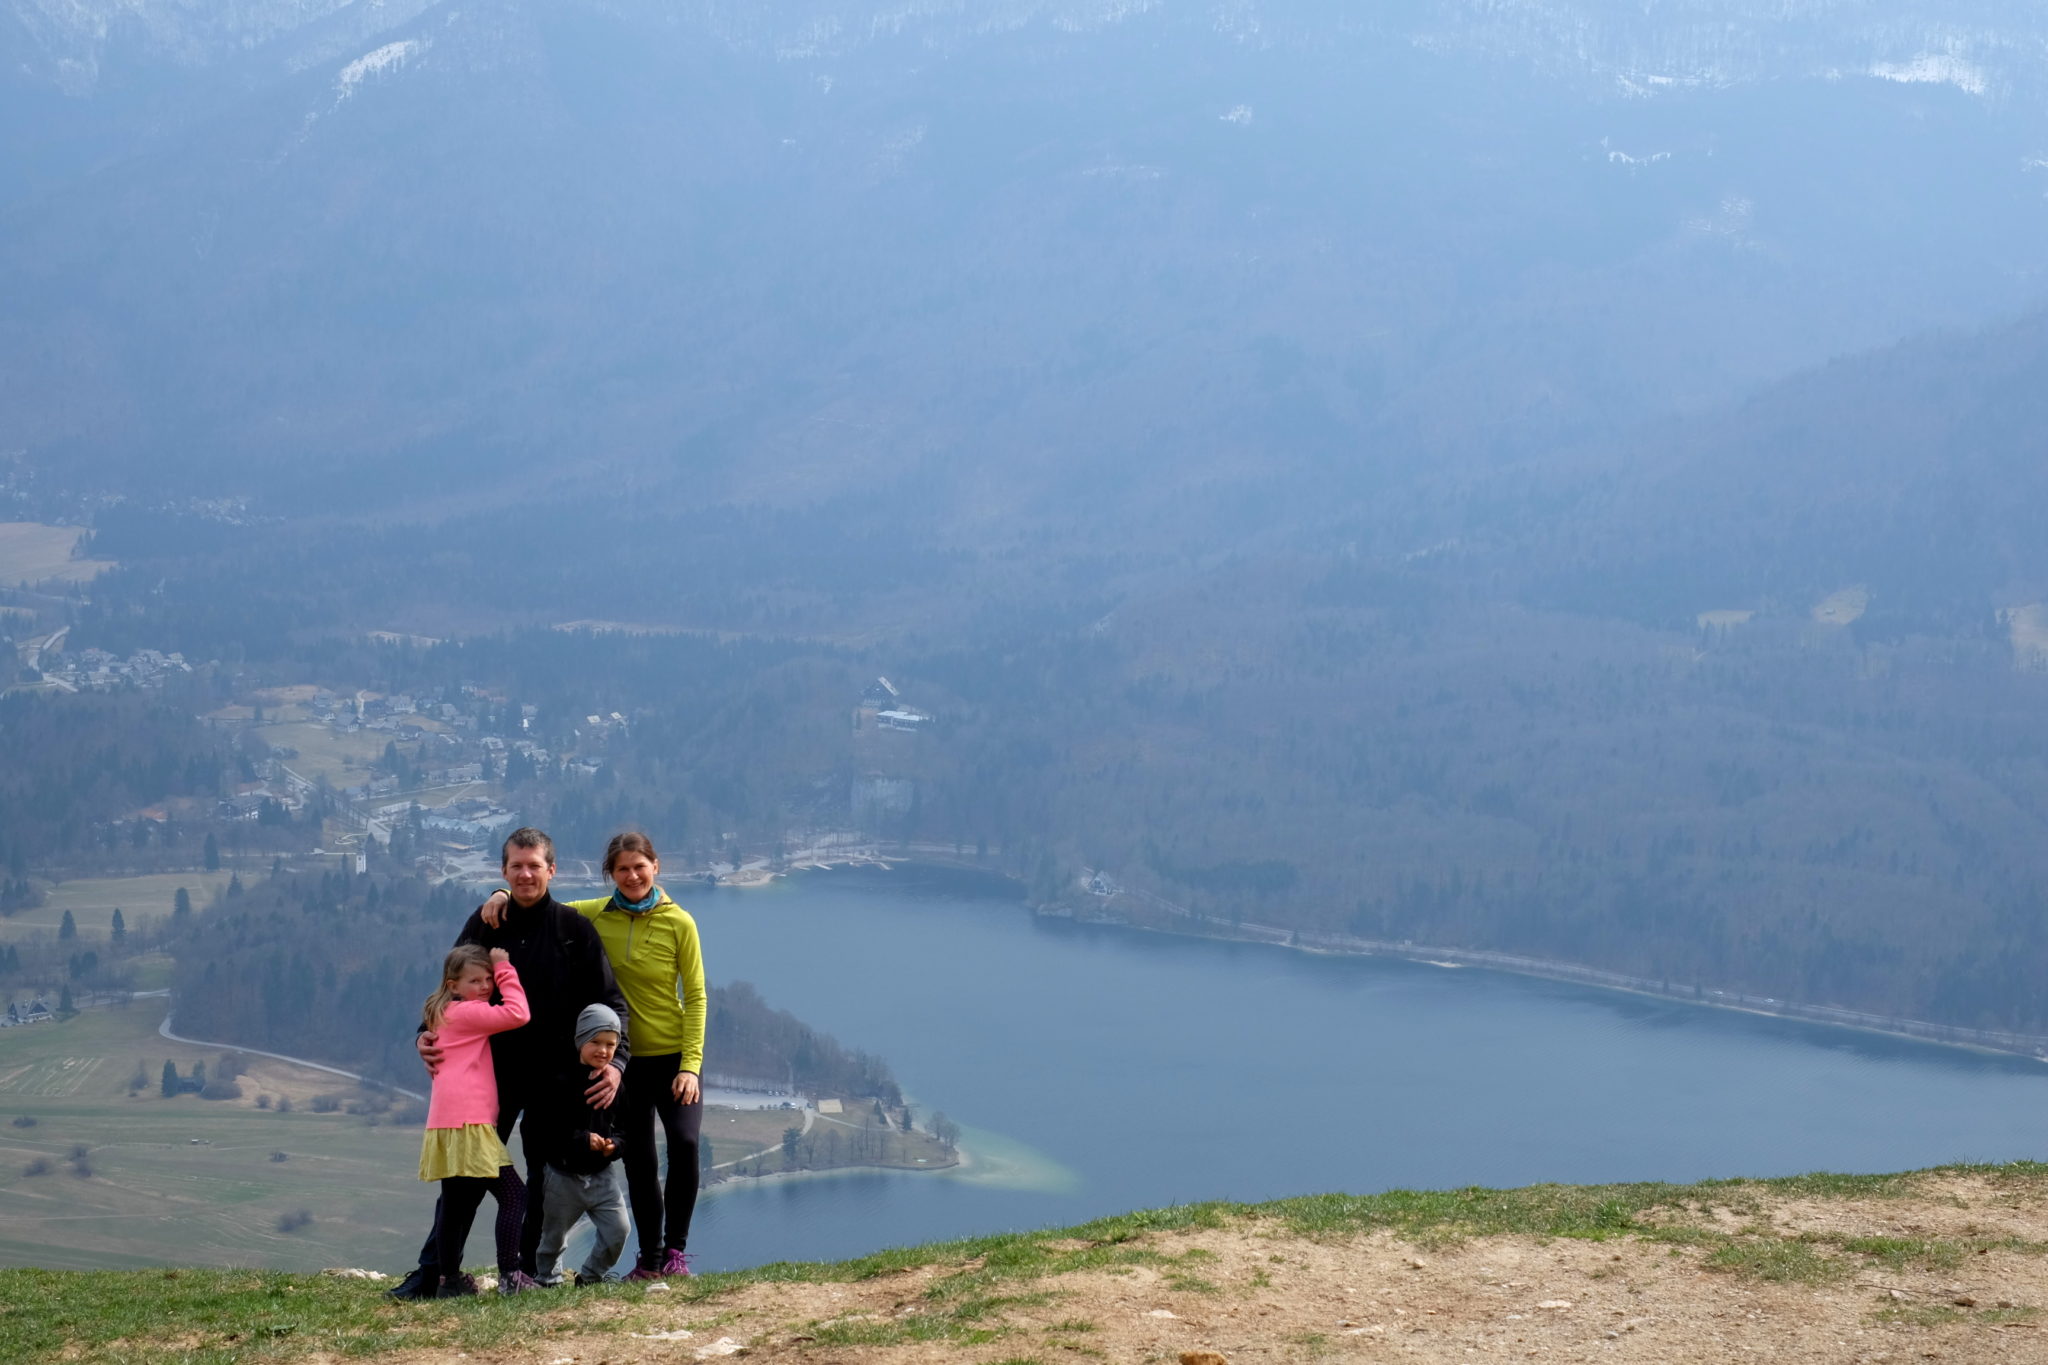 My other Instagram top photo spot over Lake Bohinj at Vogar.